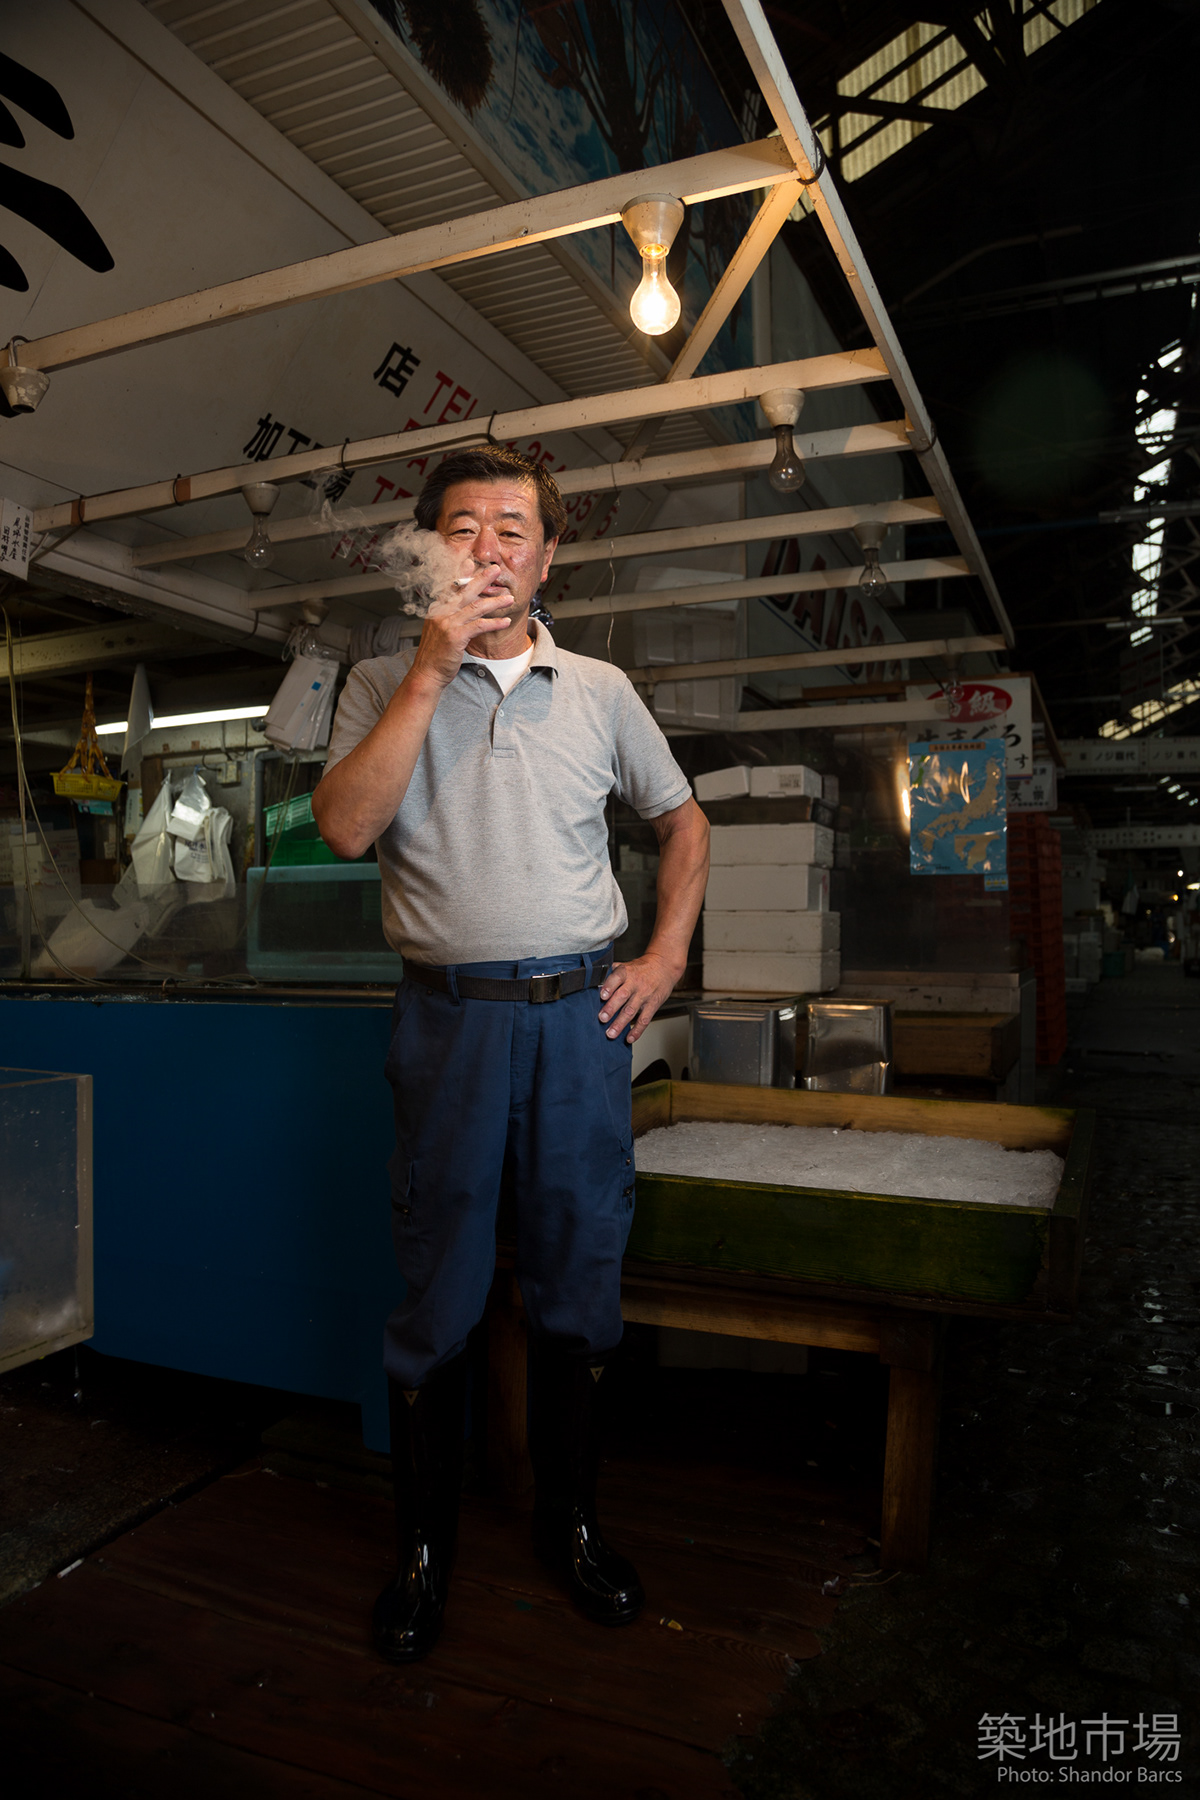 people fishmarket fish market Workers japanese portrait tsukiji tokyo japan Mexican photographer wide angle wideangle